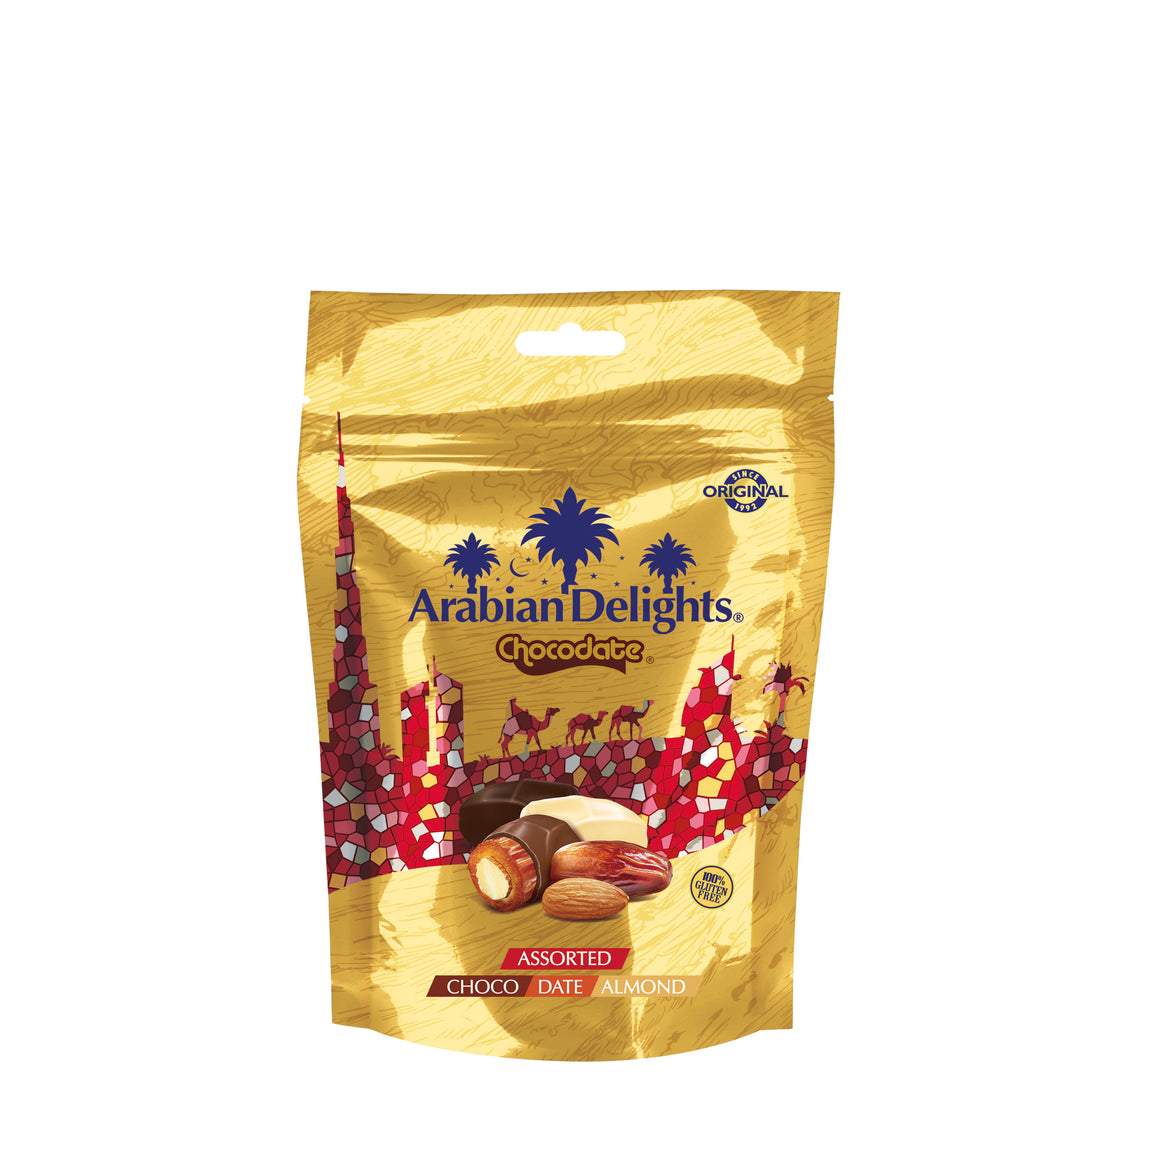 Arabian Delights Assorted Chocodate, Classic Chocolate Coated Bite-Sized Snacks, Stuffed w/ Golden Roasted Almonds ,Dates| Snacks & Sweets 90g Pouch